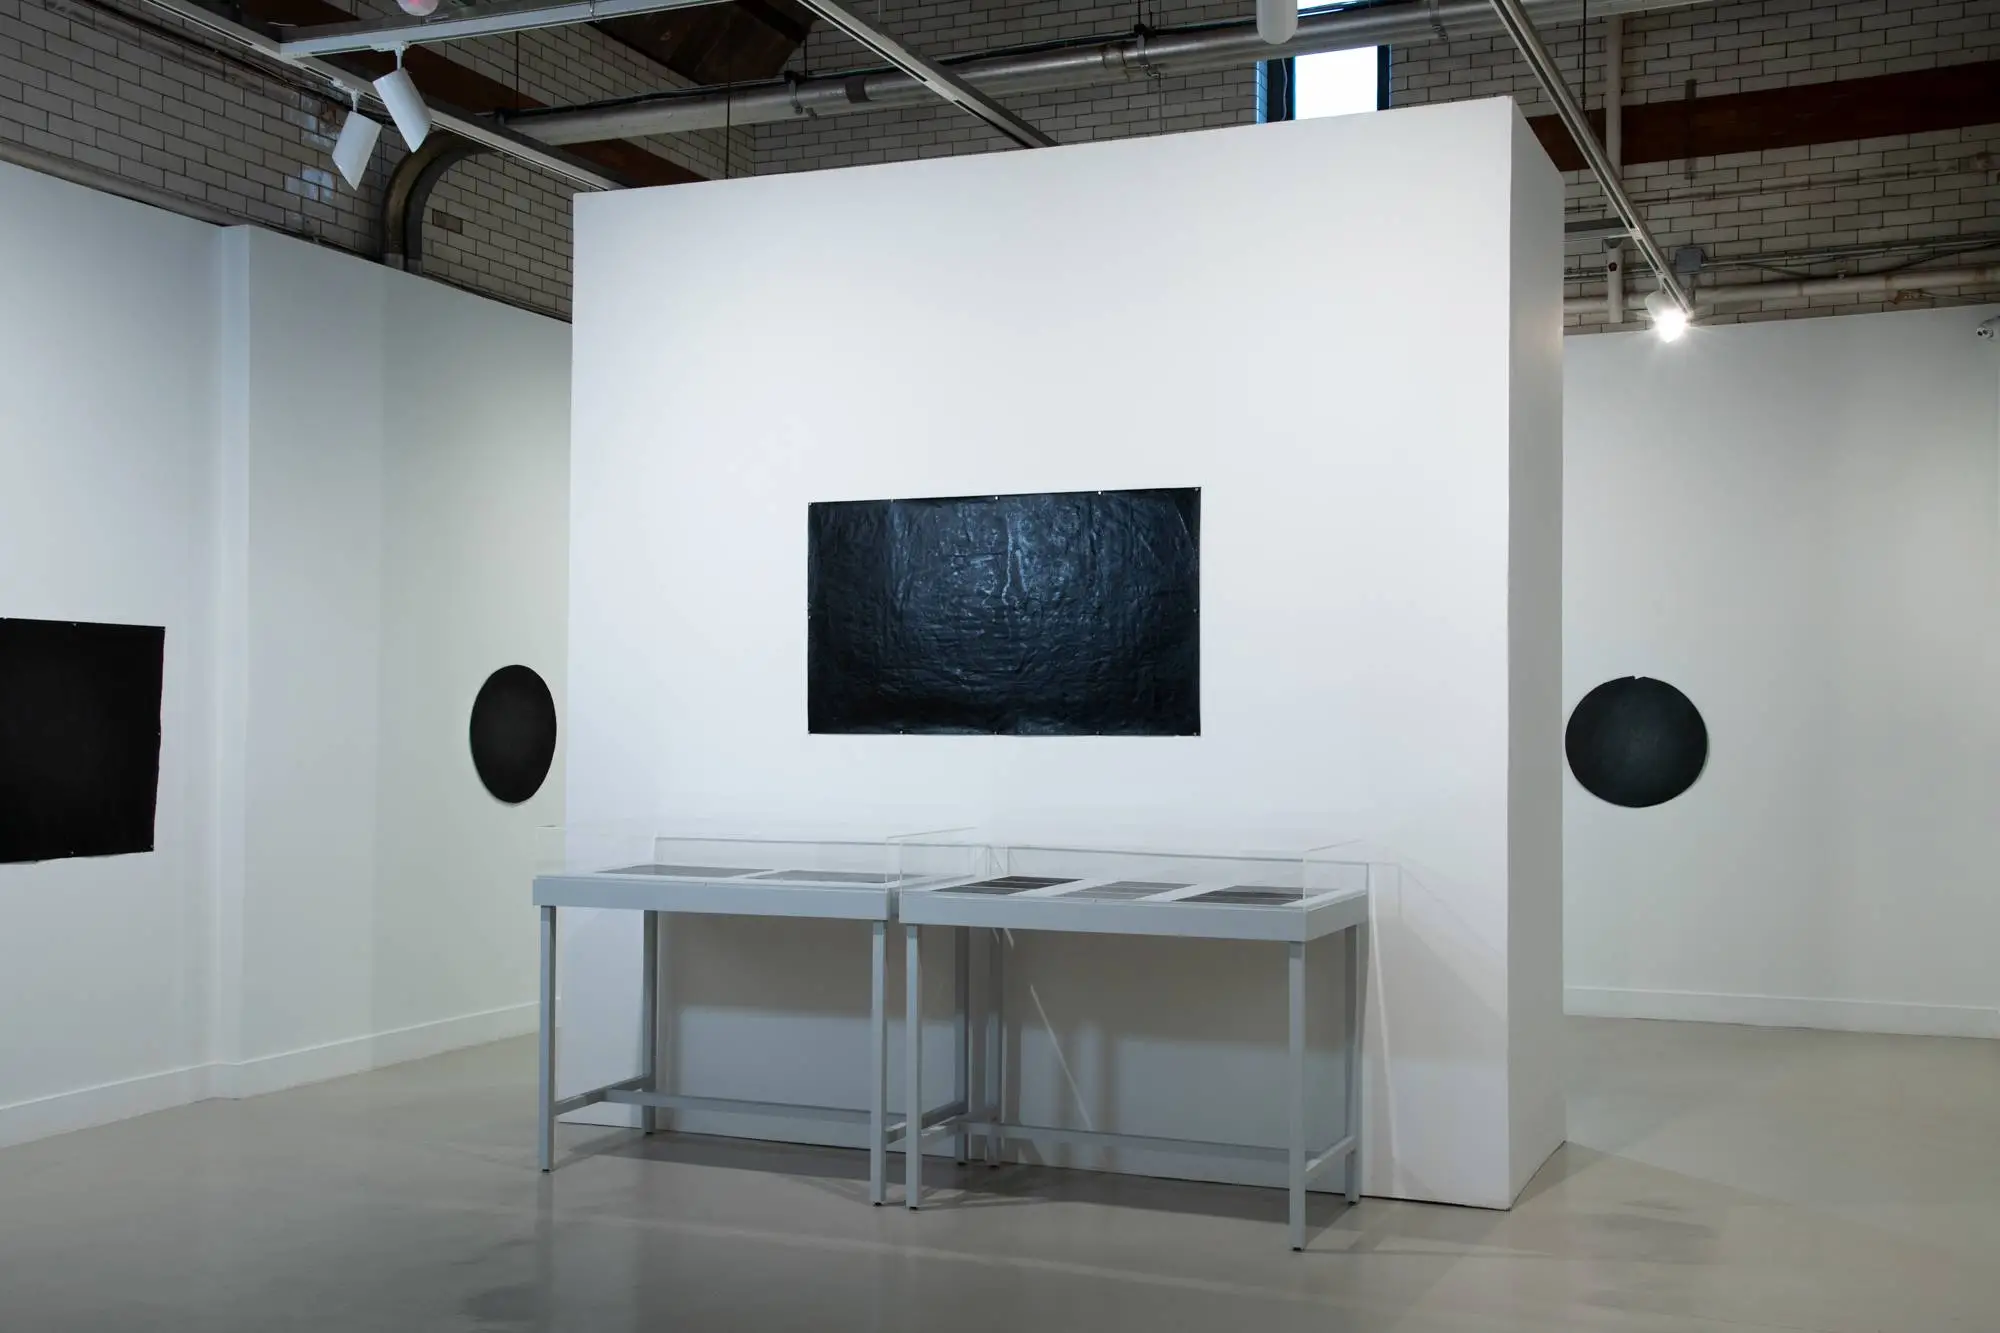 Installation view, "Quentin Morris: Works on Paper," Spruance Gallery, photo: Sam Fritch